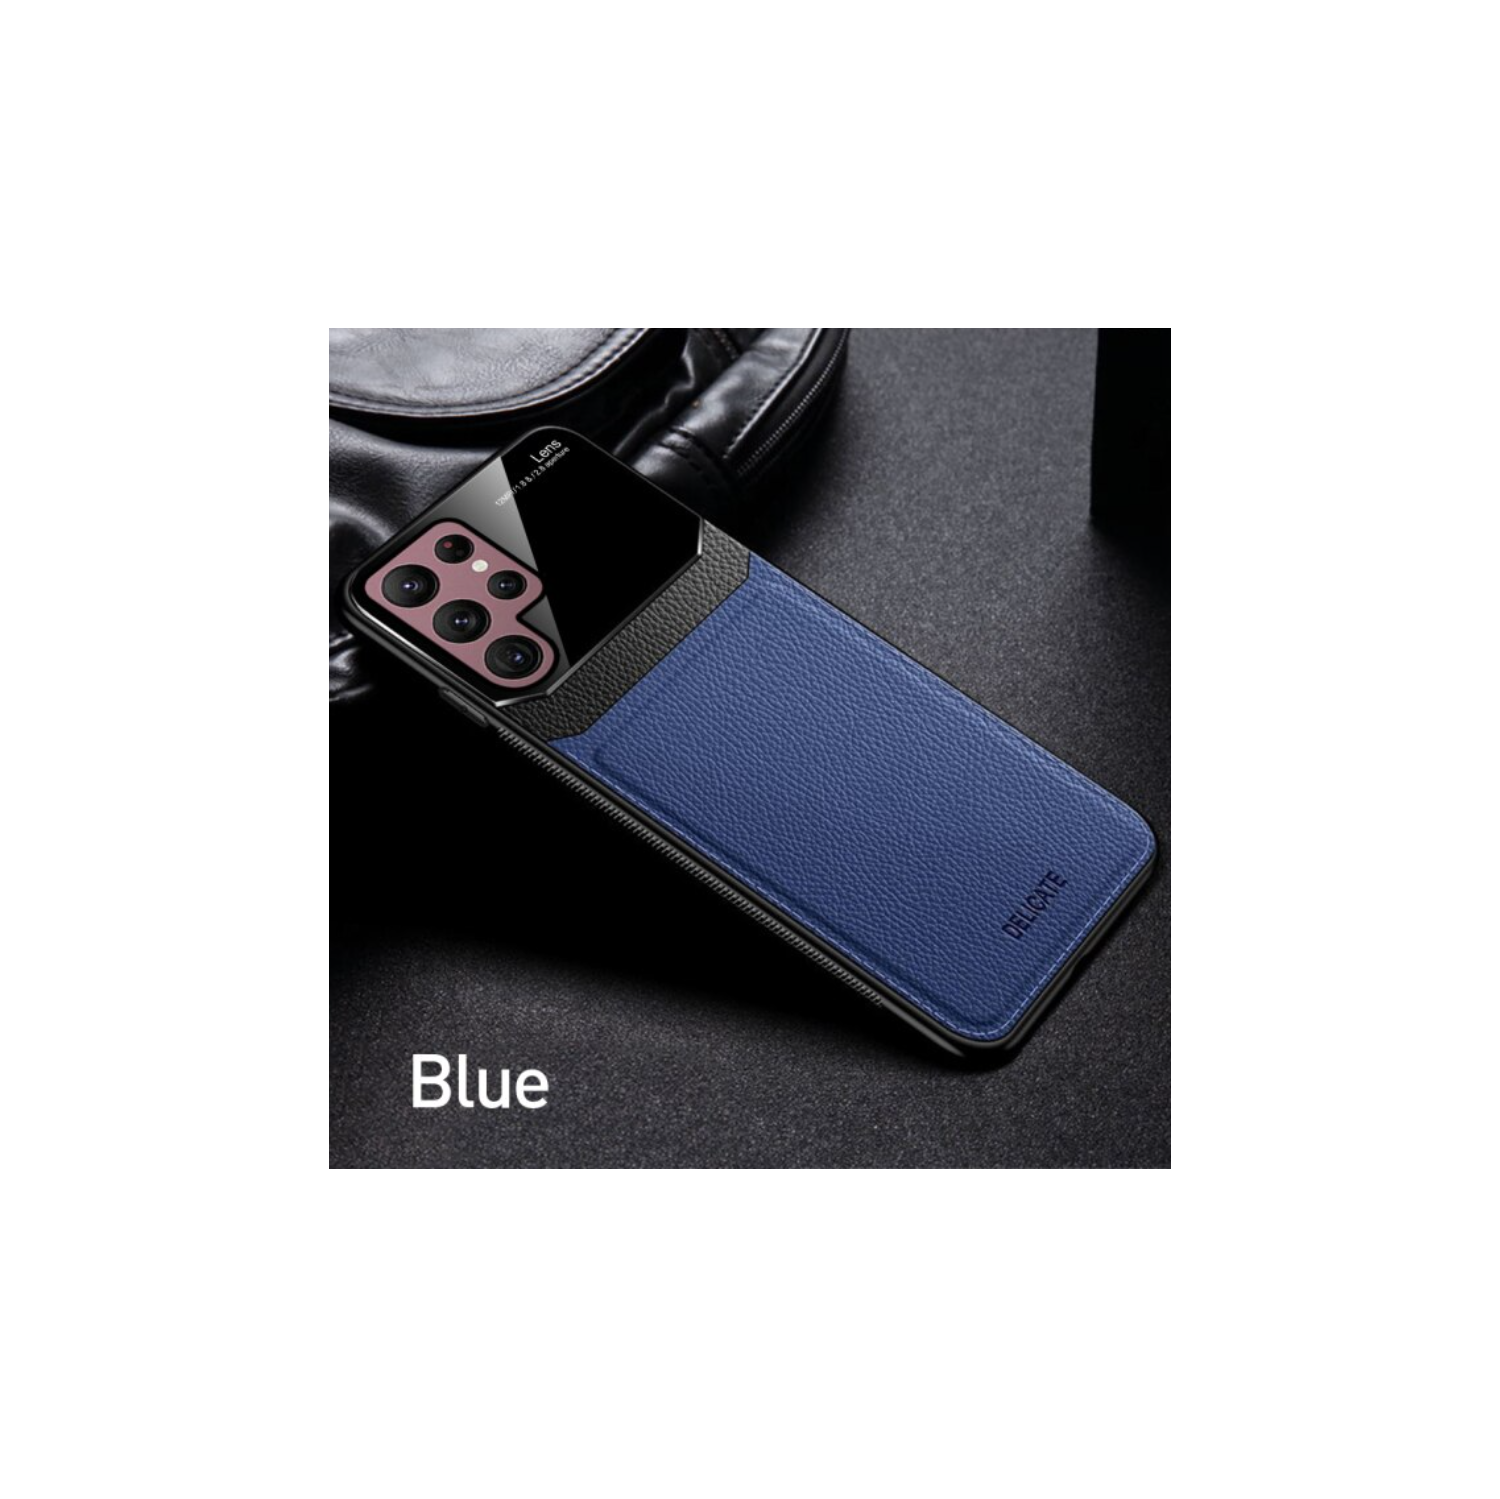 Delfin Leather Case Anti Slide Camera Protection Shockproof cover Plexiglass Bumper Phone Case Slim Cover for Samsung Galaxy S22 ULTRA -Blue (FREE SHIPPING)